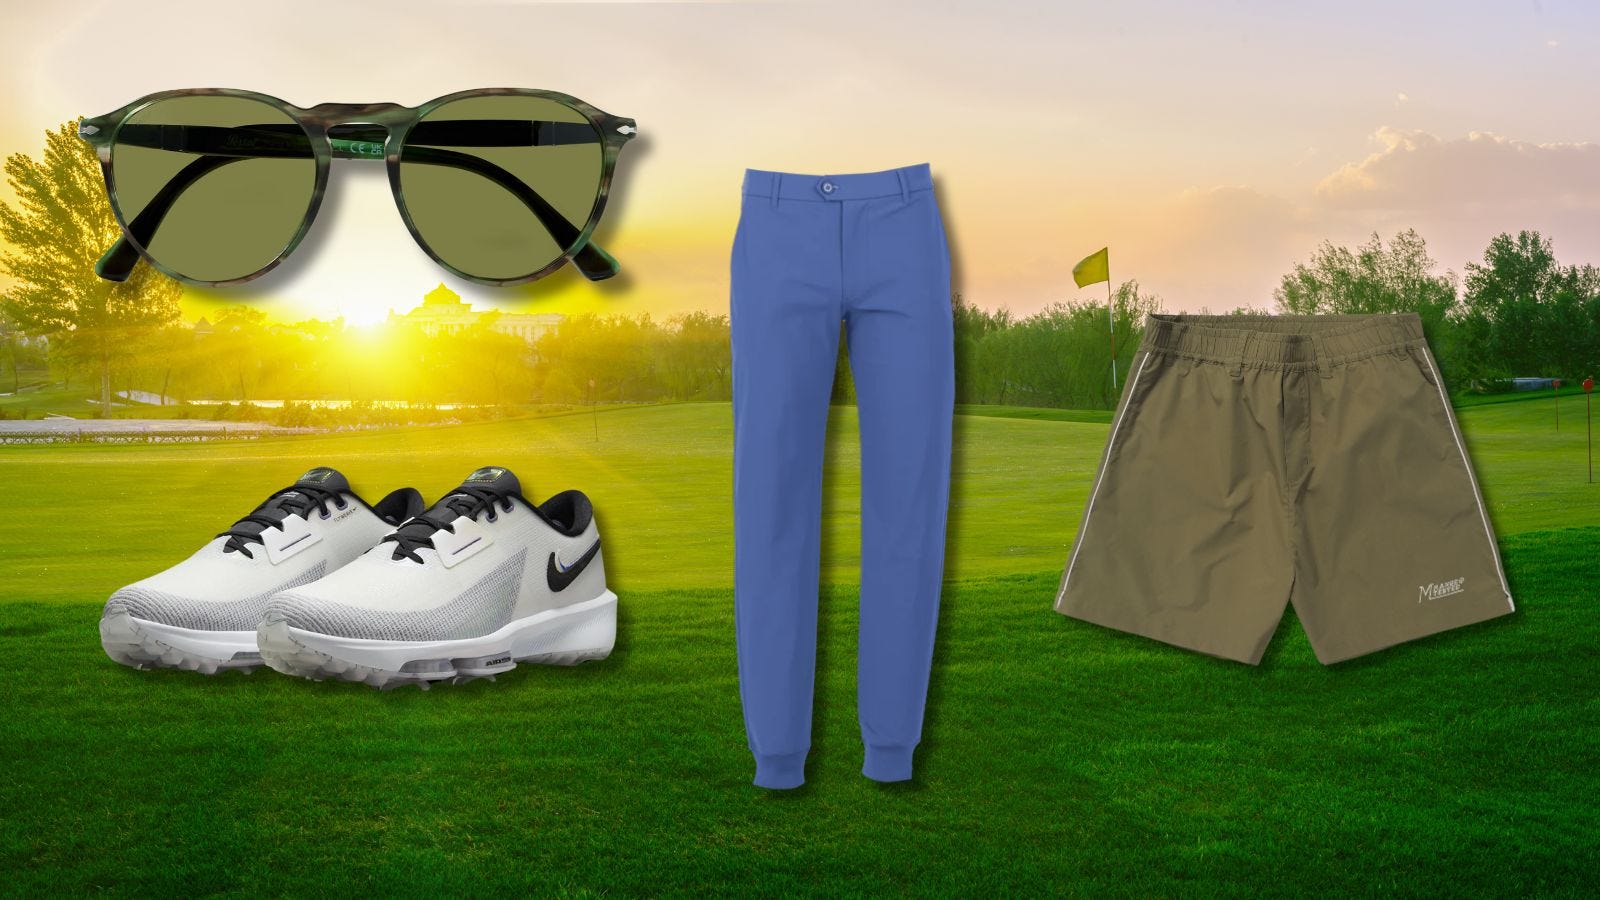 various men's golf clothes and accessories, set against a golf green background